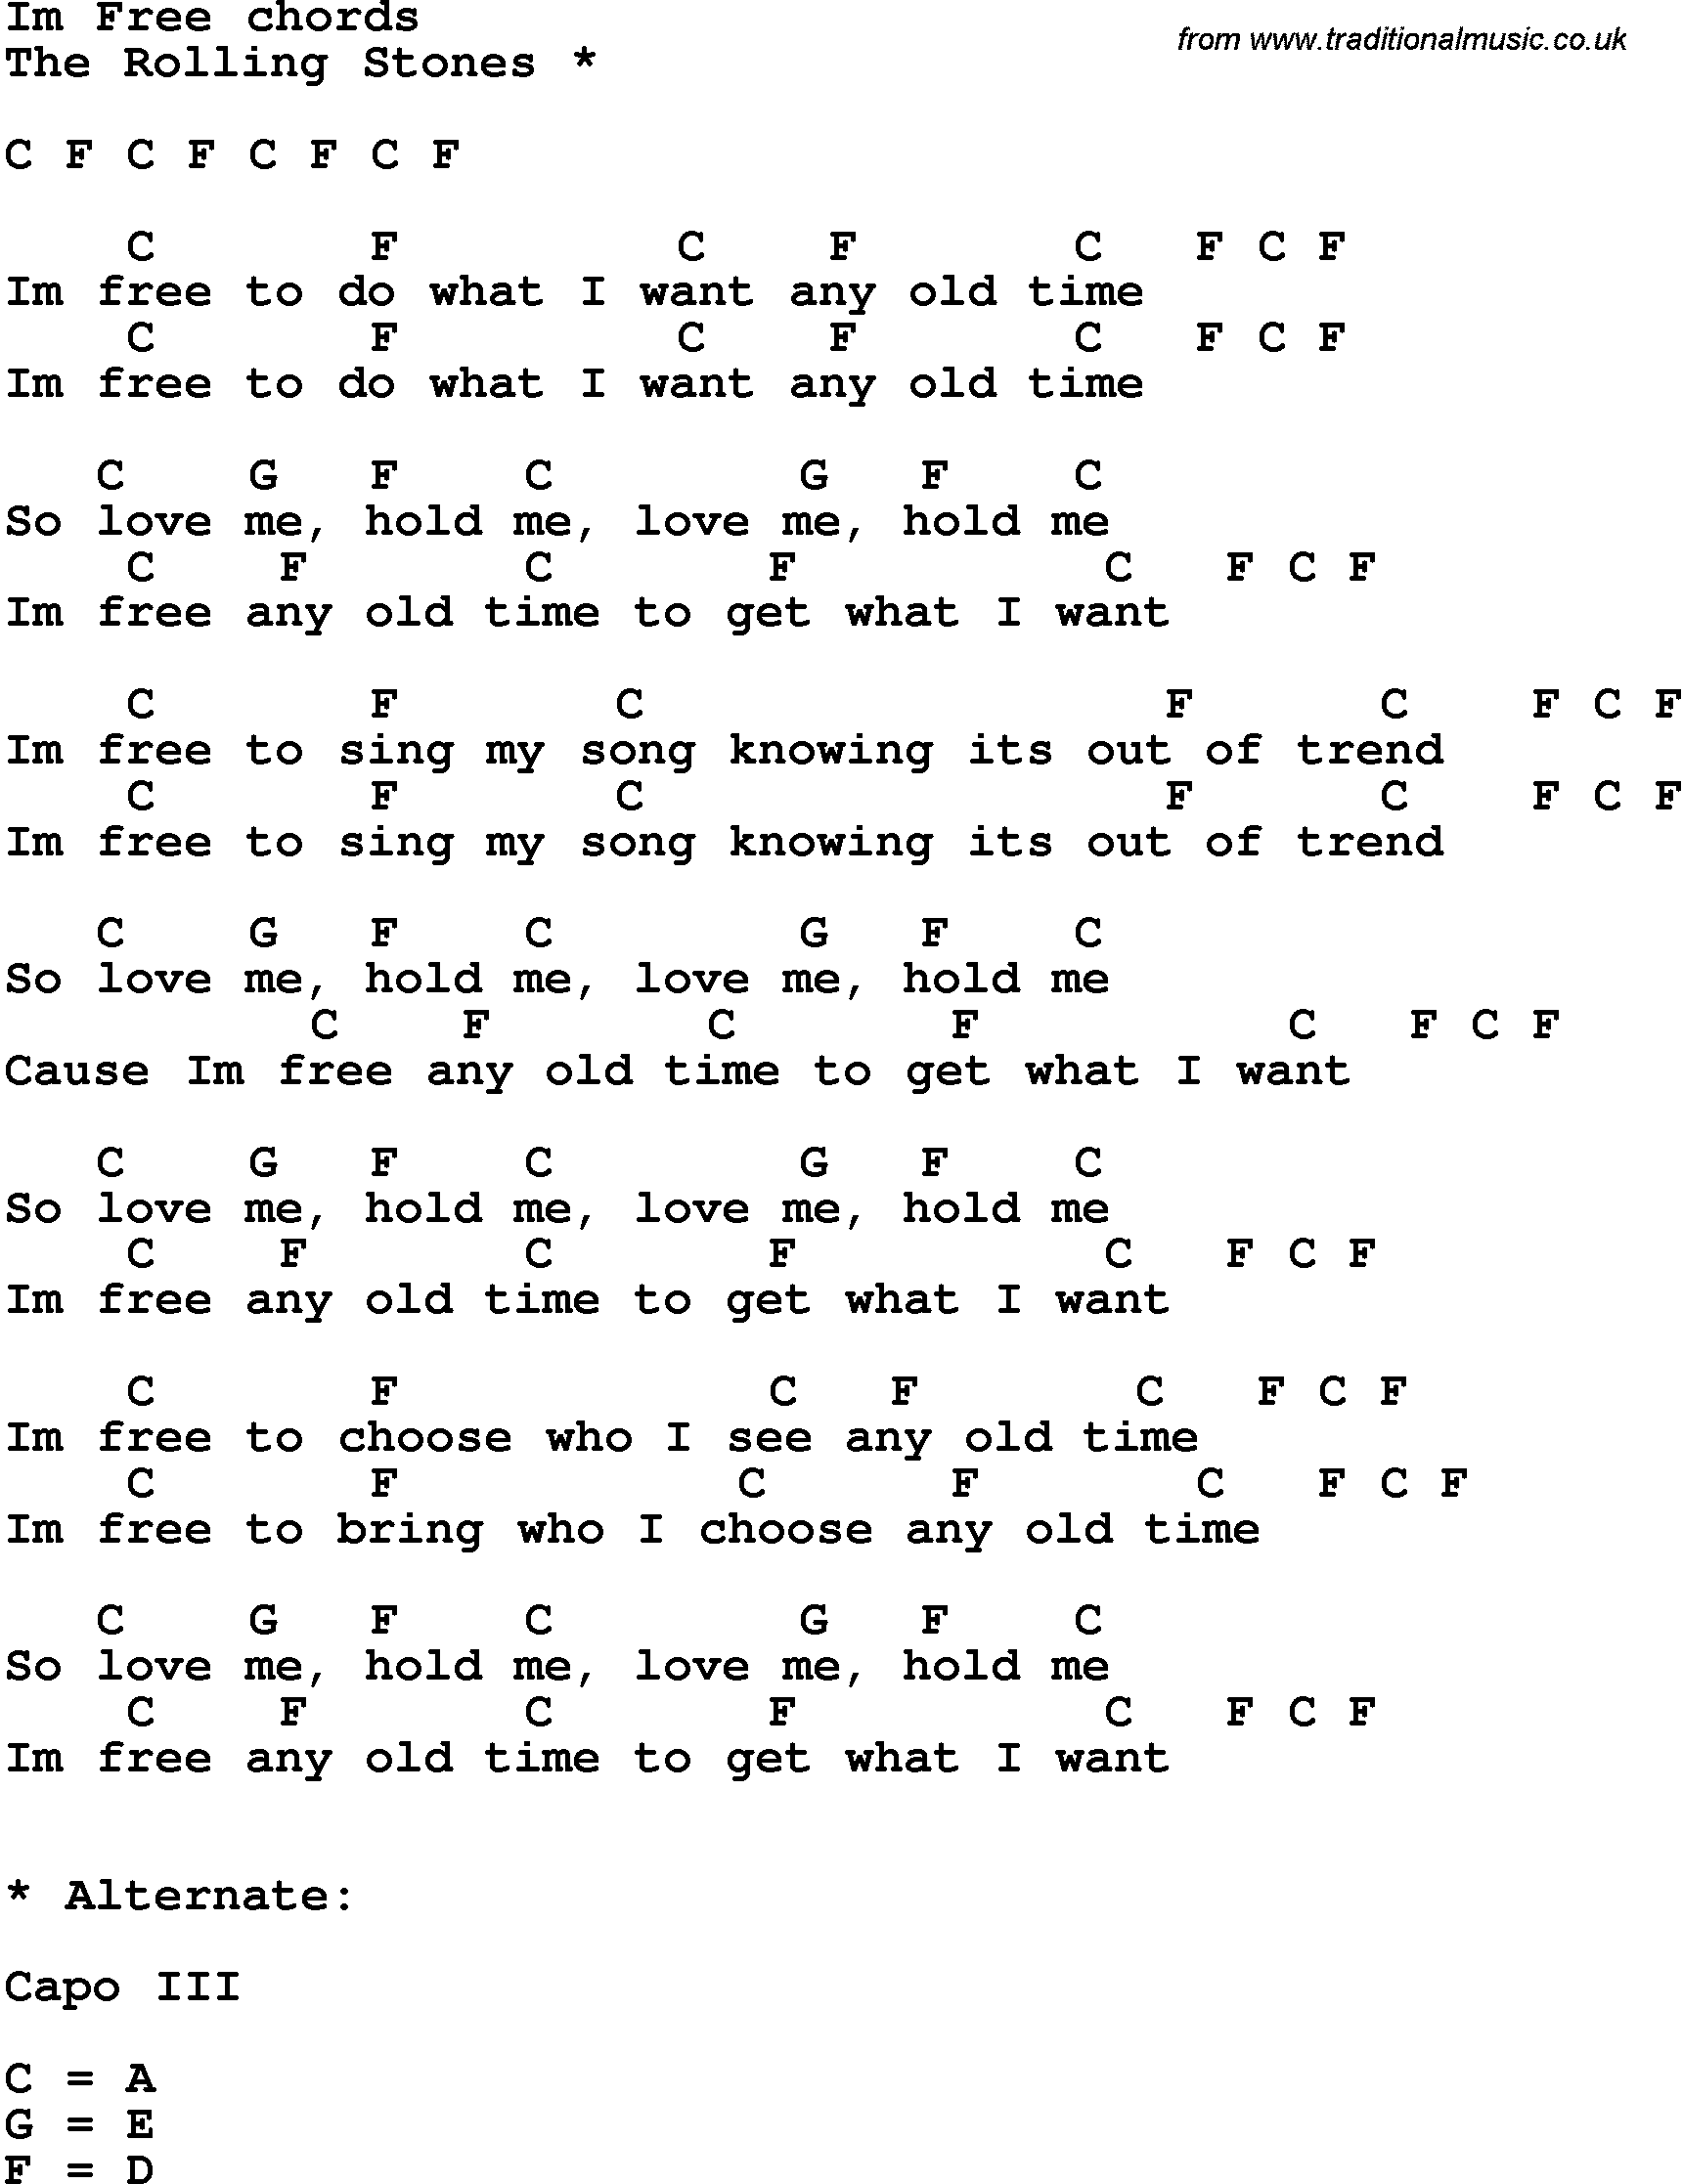 Song Lyrics with guitar chords for I'm Free